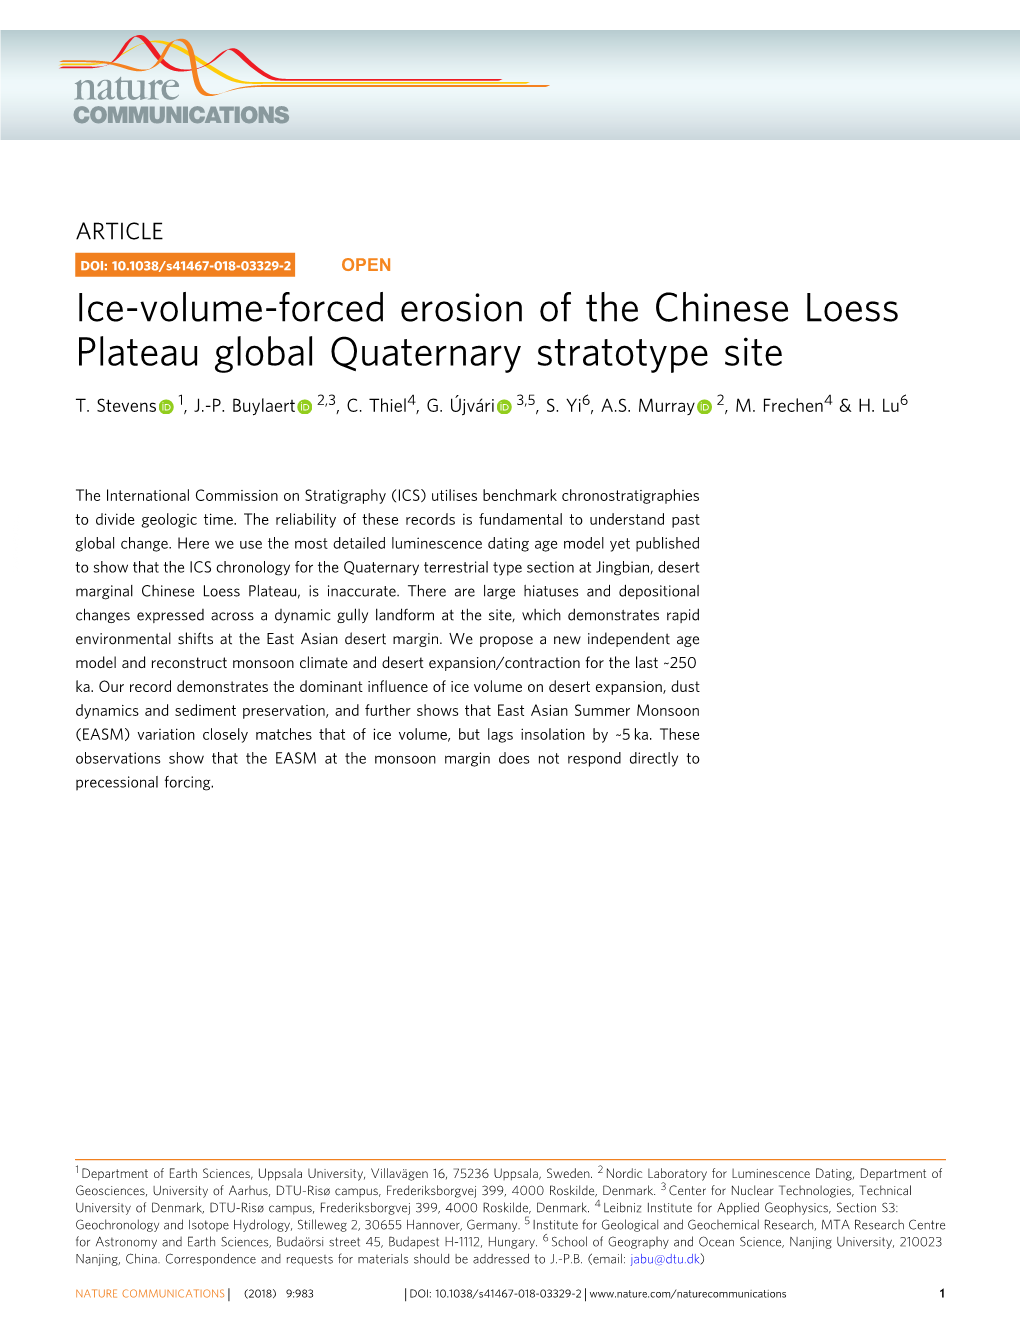 Ice-Volume-Forced Erosion of the Chinese Loess Plateau Global Quaternary Stratotype Site